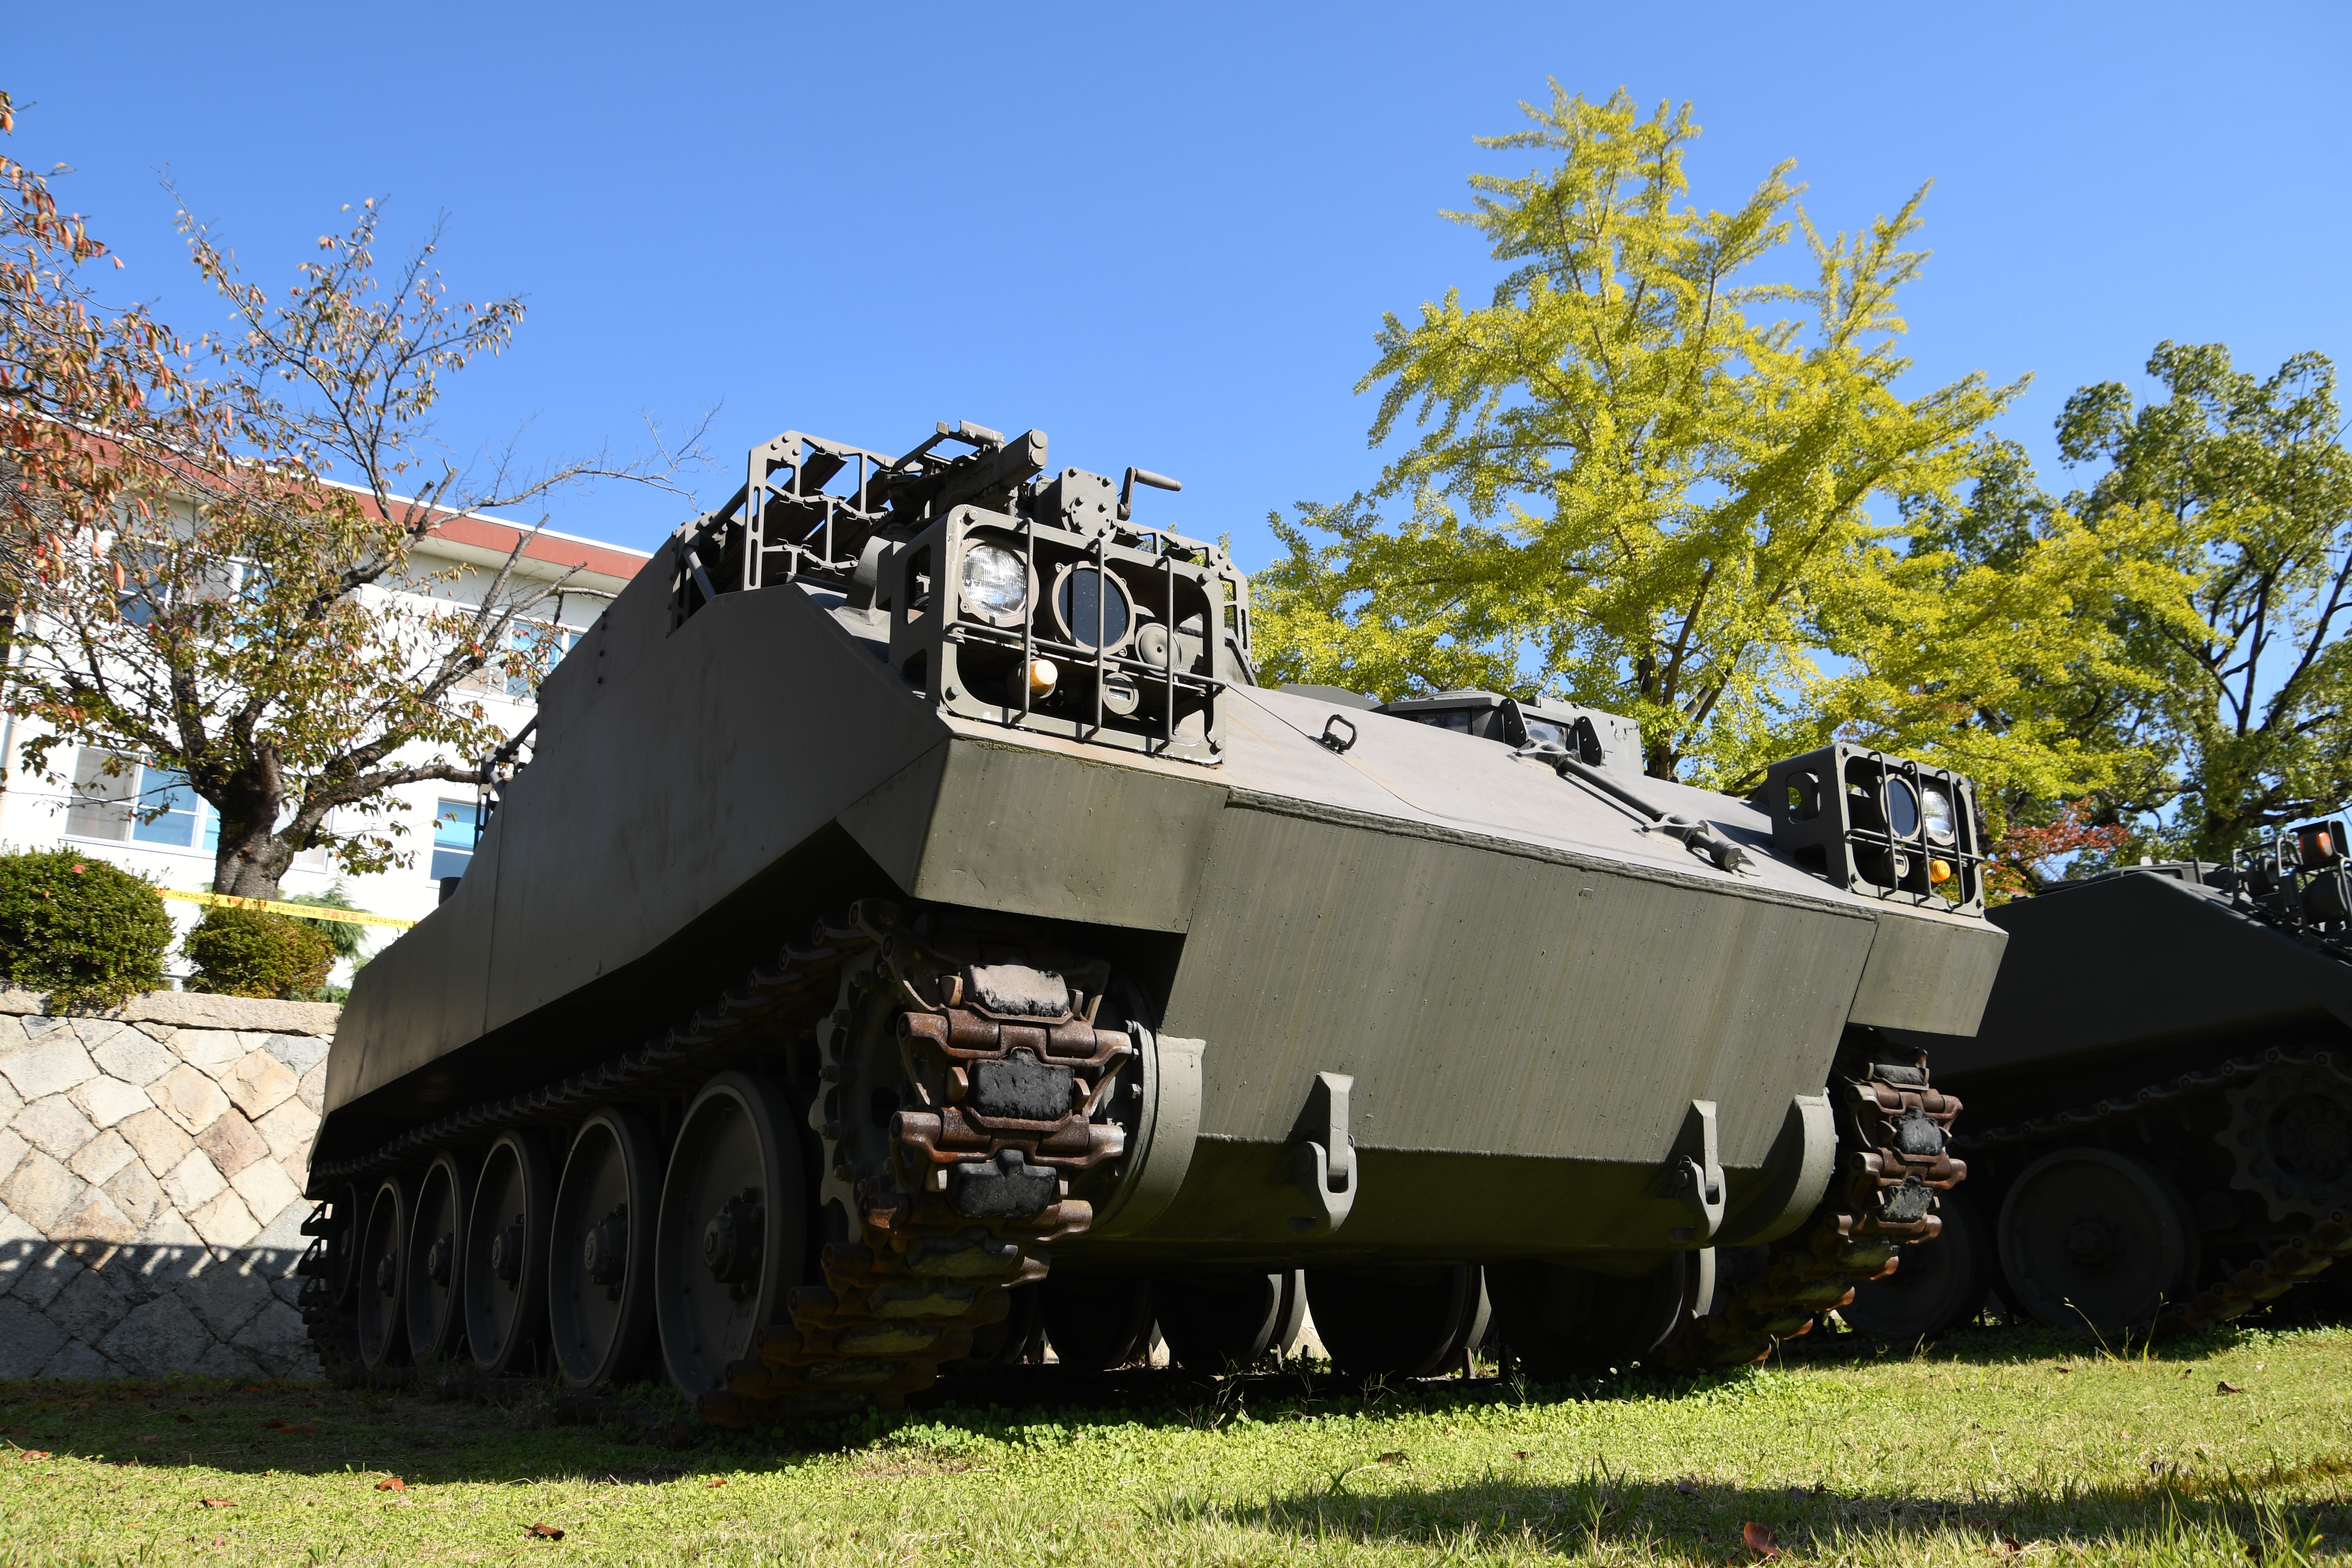 File:JGSDF 75 130mm Multiple Rocket Launcher(No.KA161-0063A) front low-angle view at Himeji 21, 2018 01.jpg - Wikimedia Commons